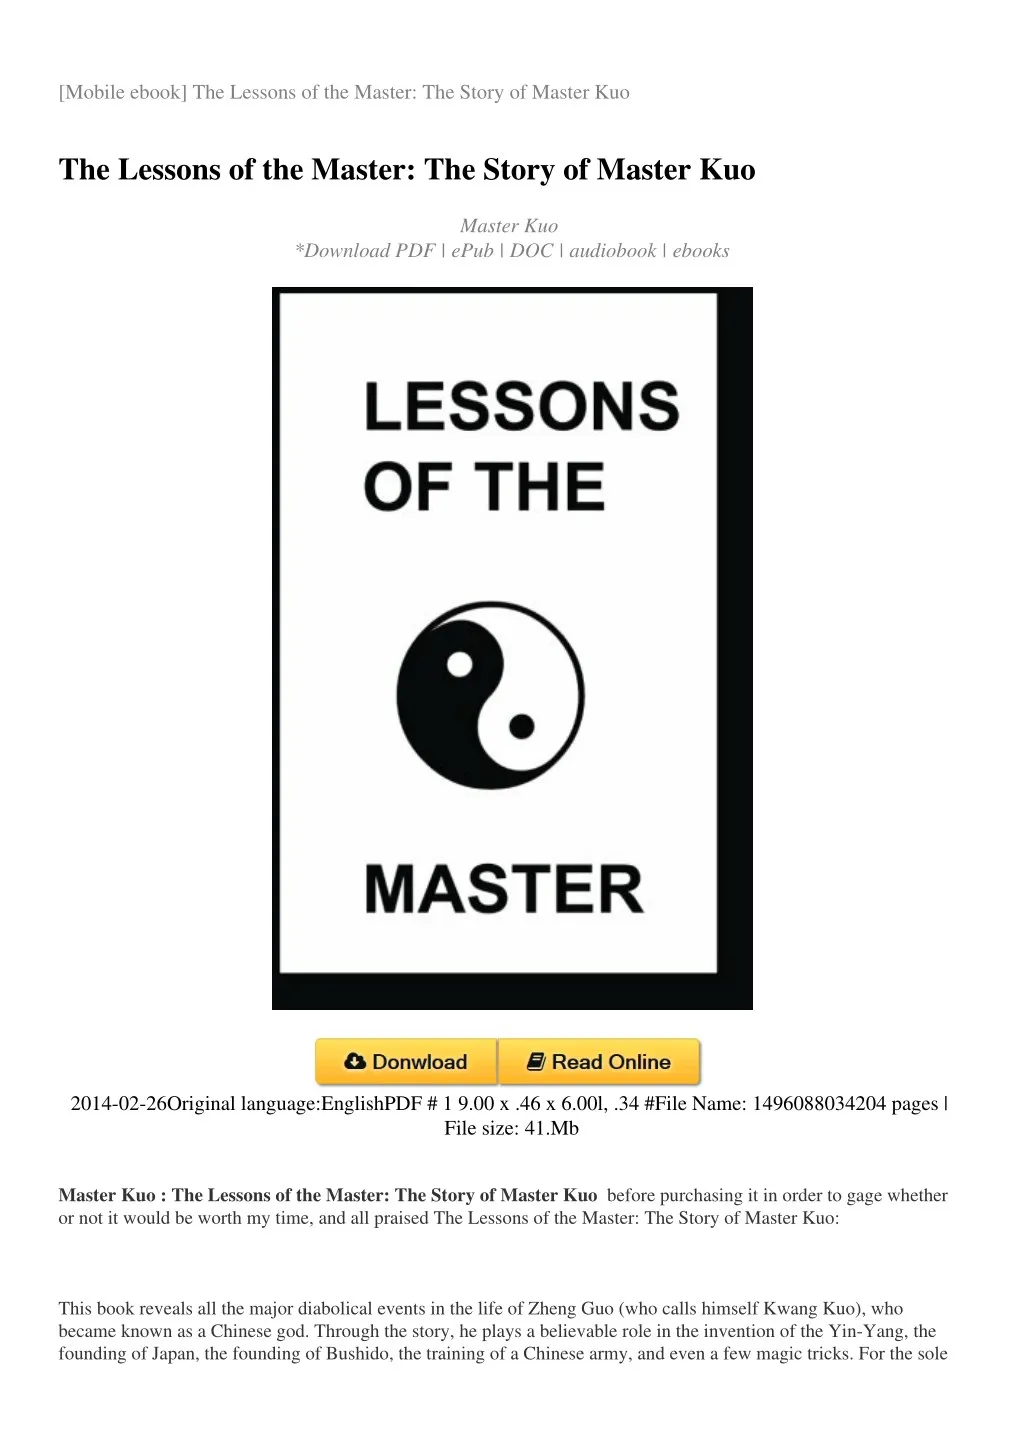 mobile ebook the lessons of the master the story